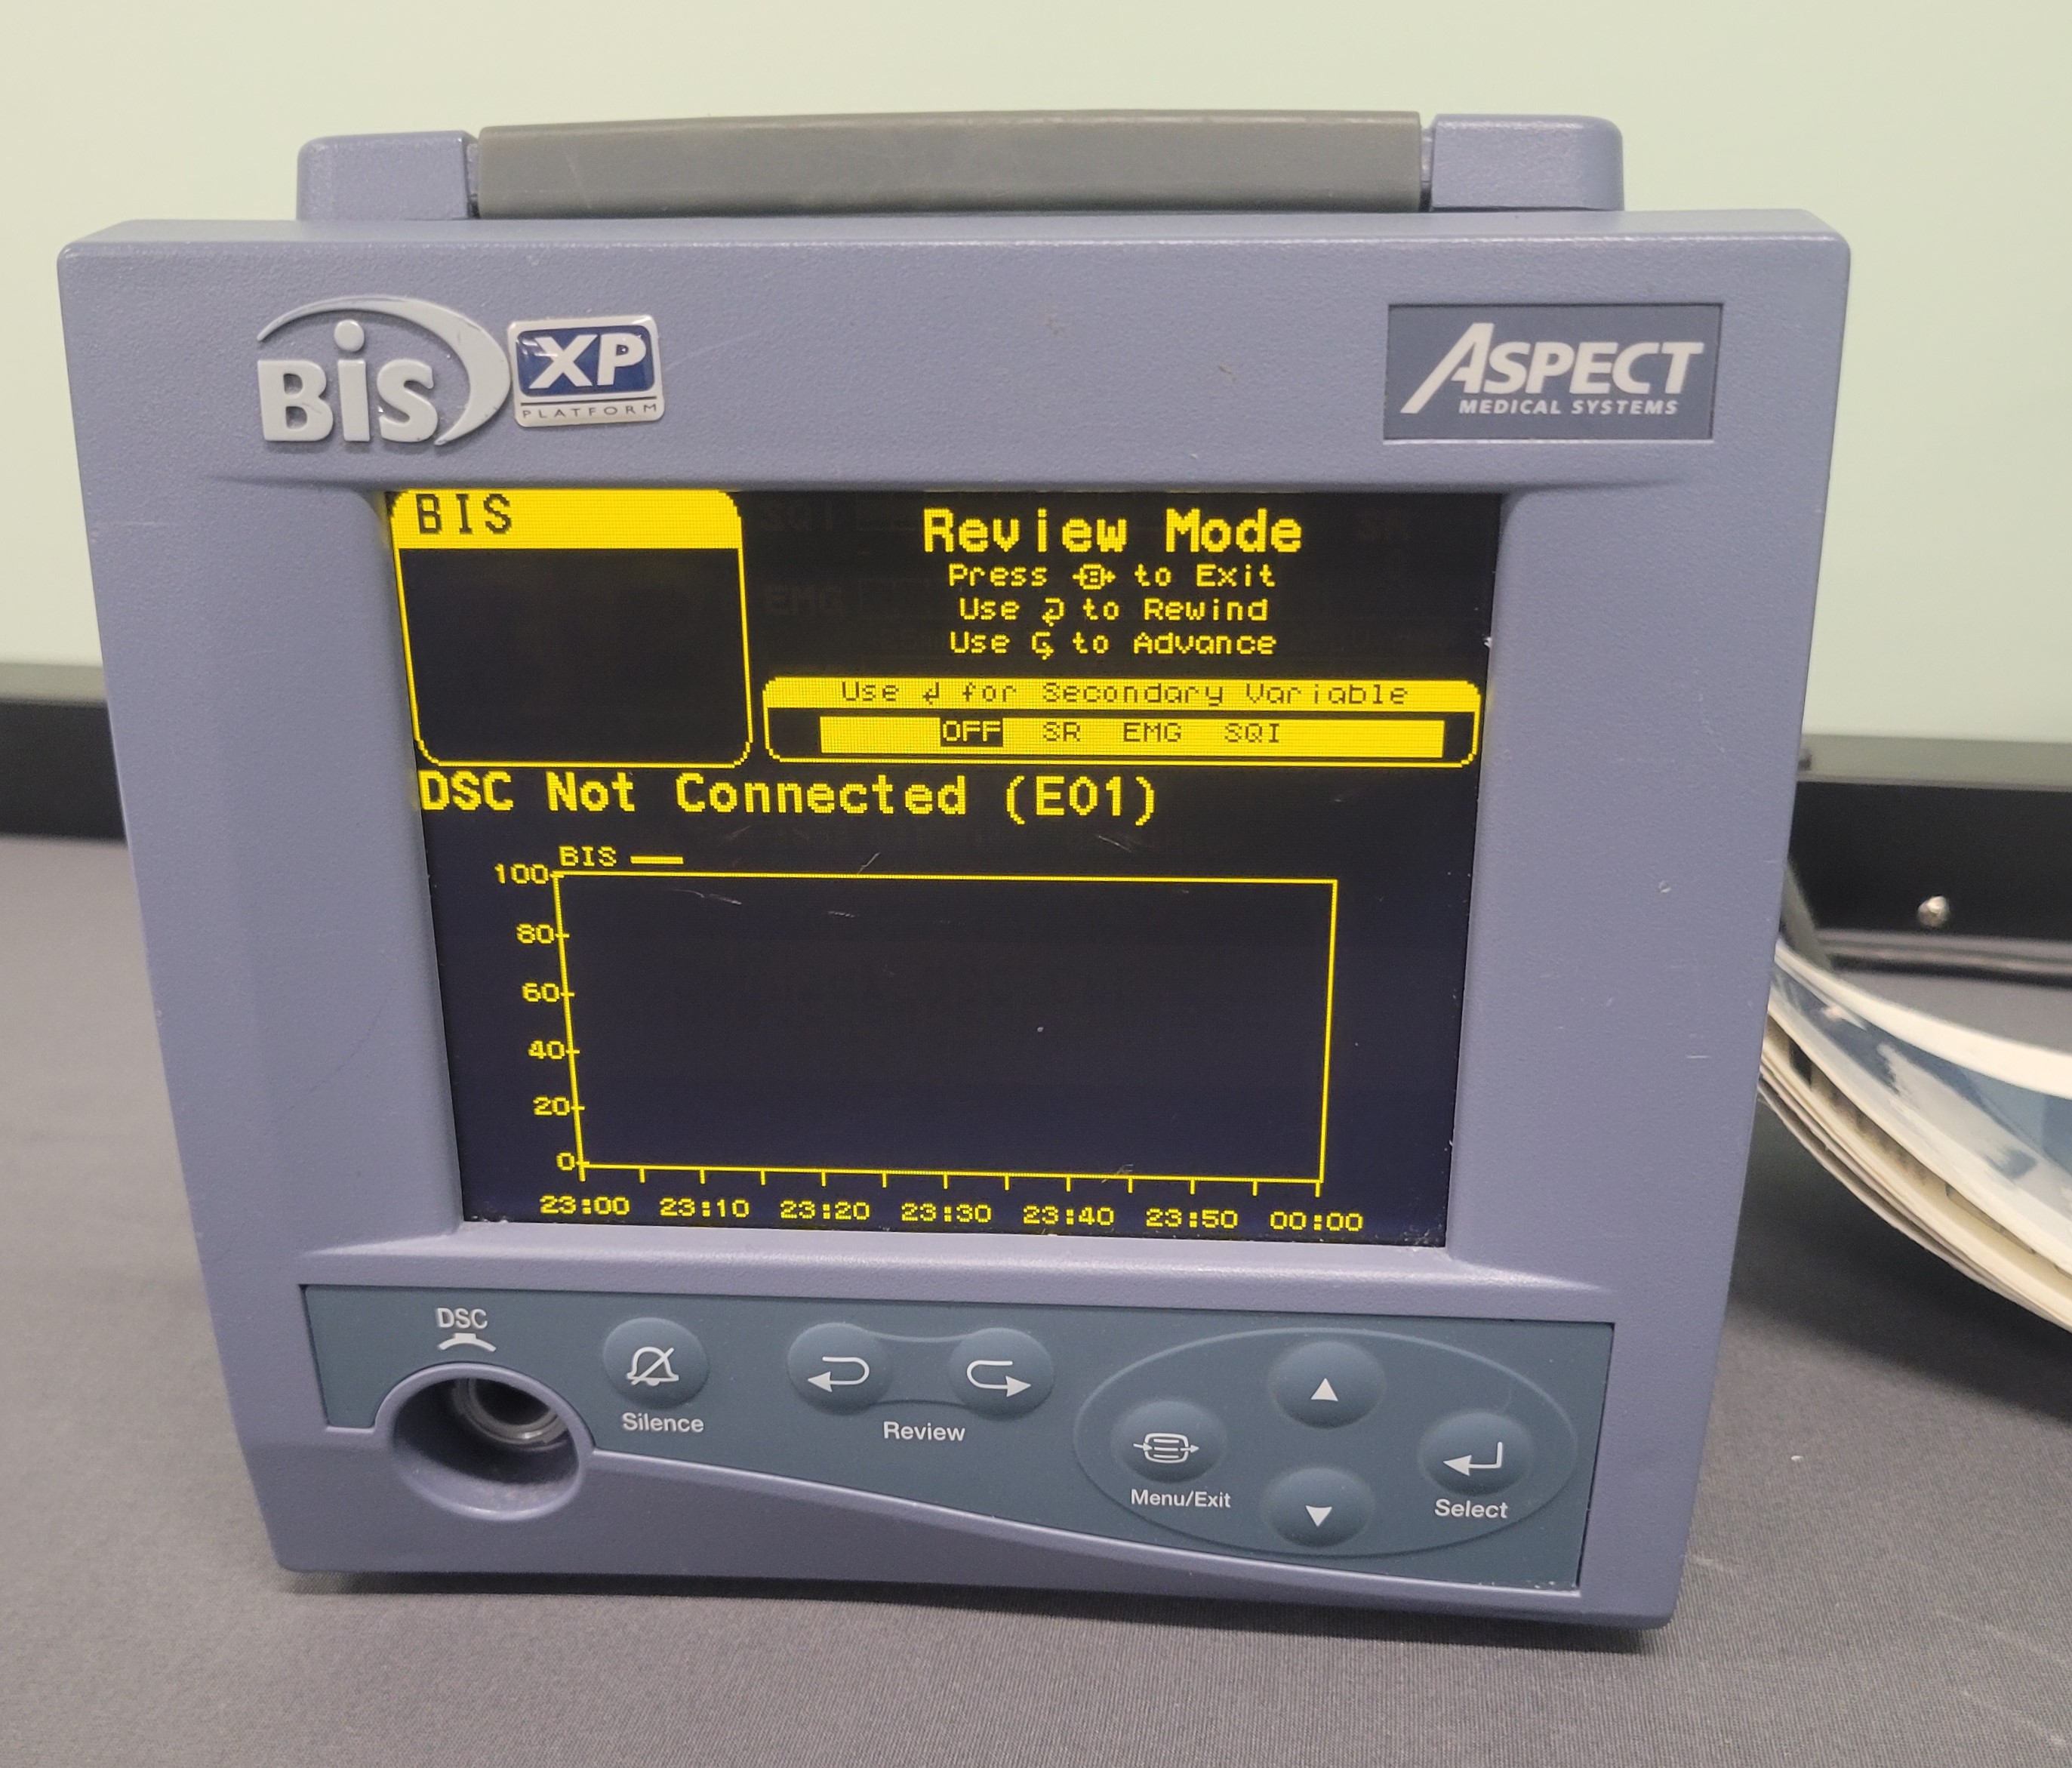 Aspect Model A-2000 Bispectral Index (BIS) Anesthesia Patient Monitor